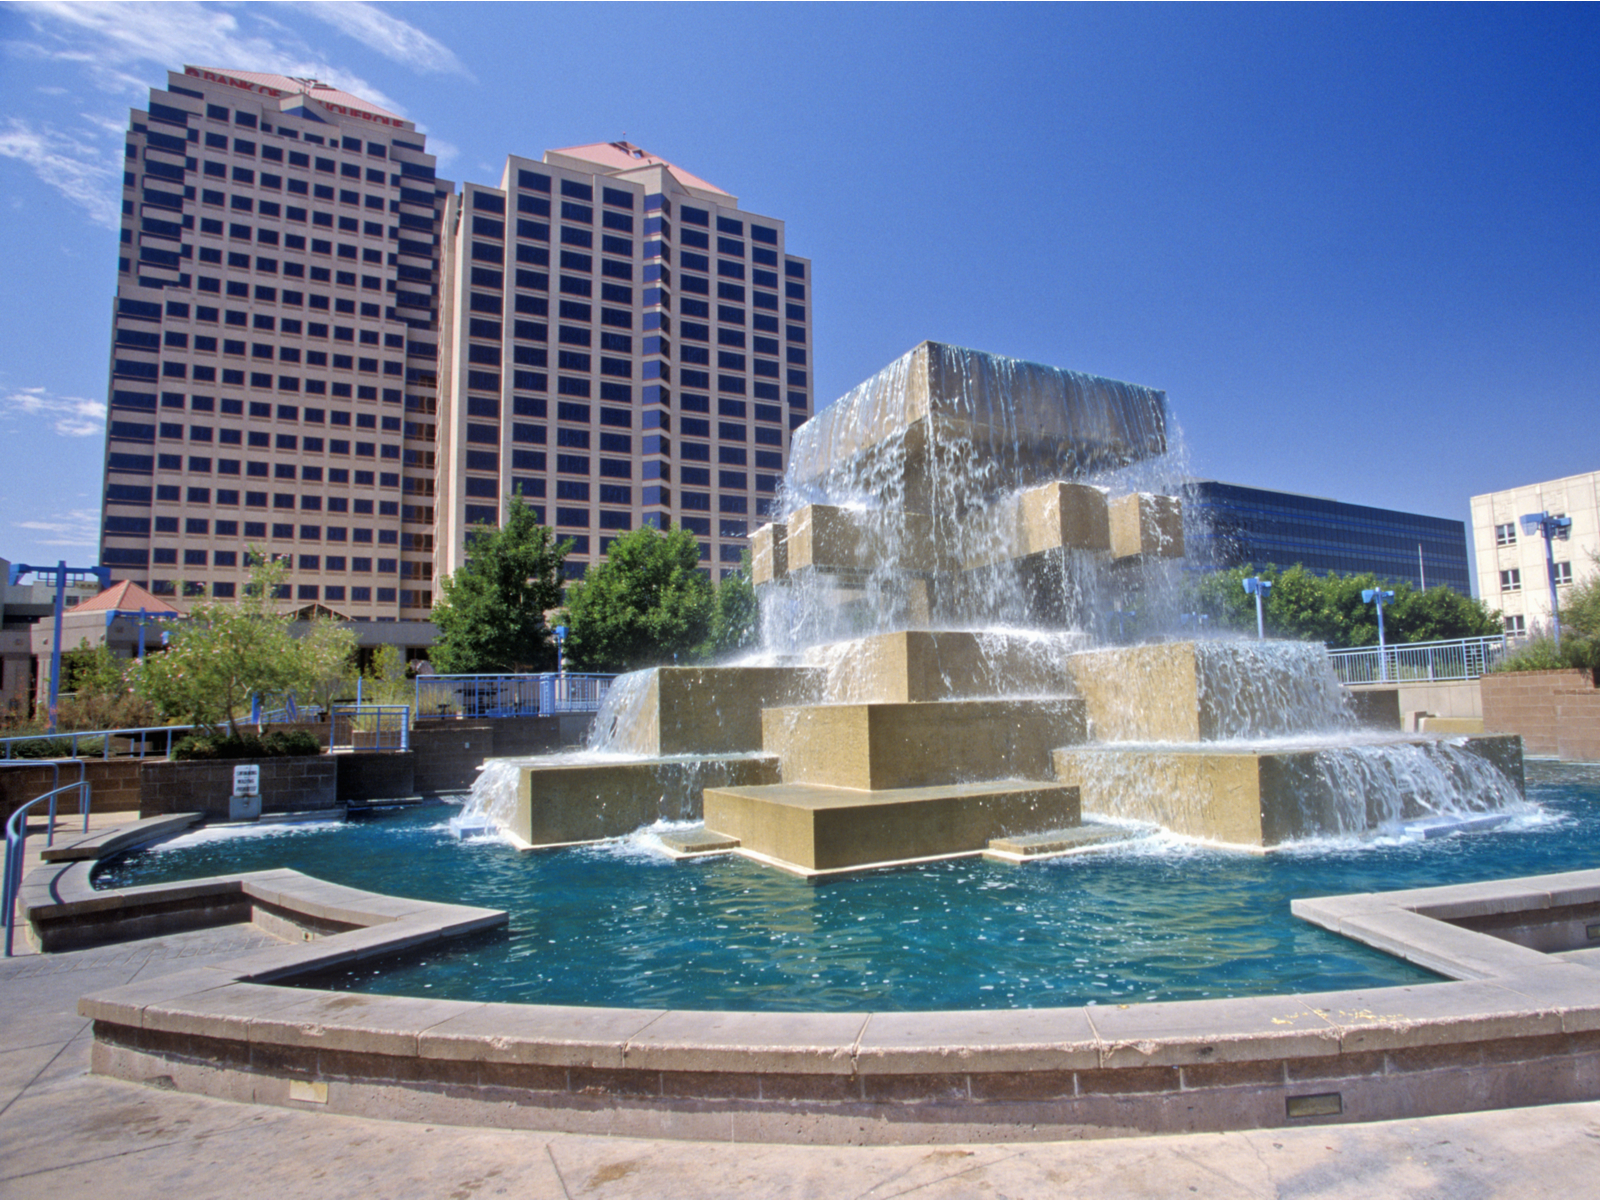 Fountain in the city center of downtown Albuquerque, NM